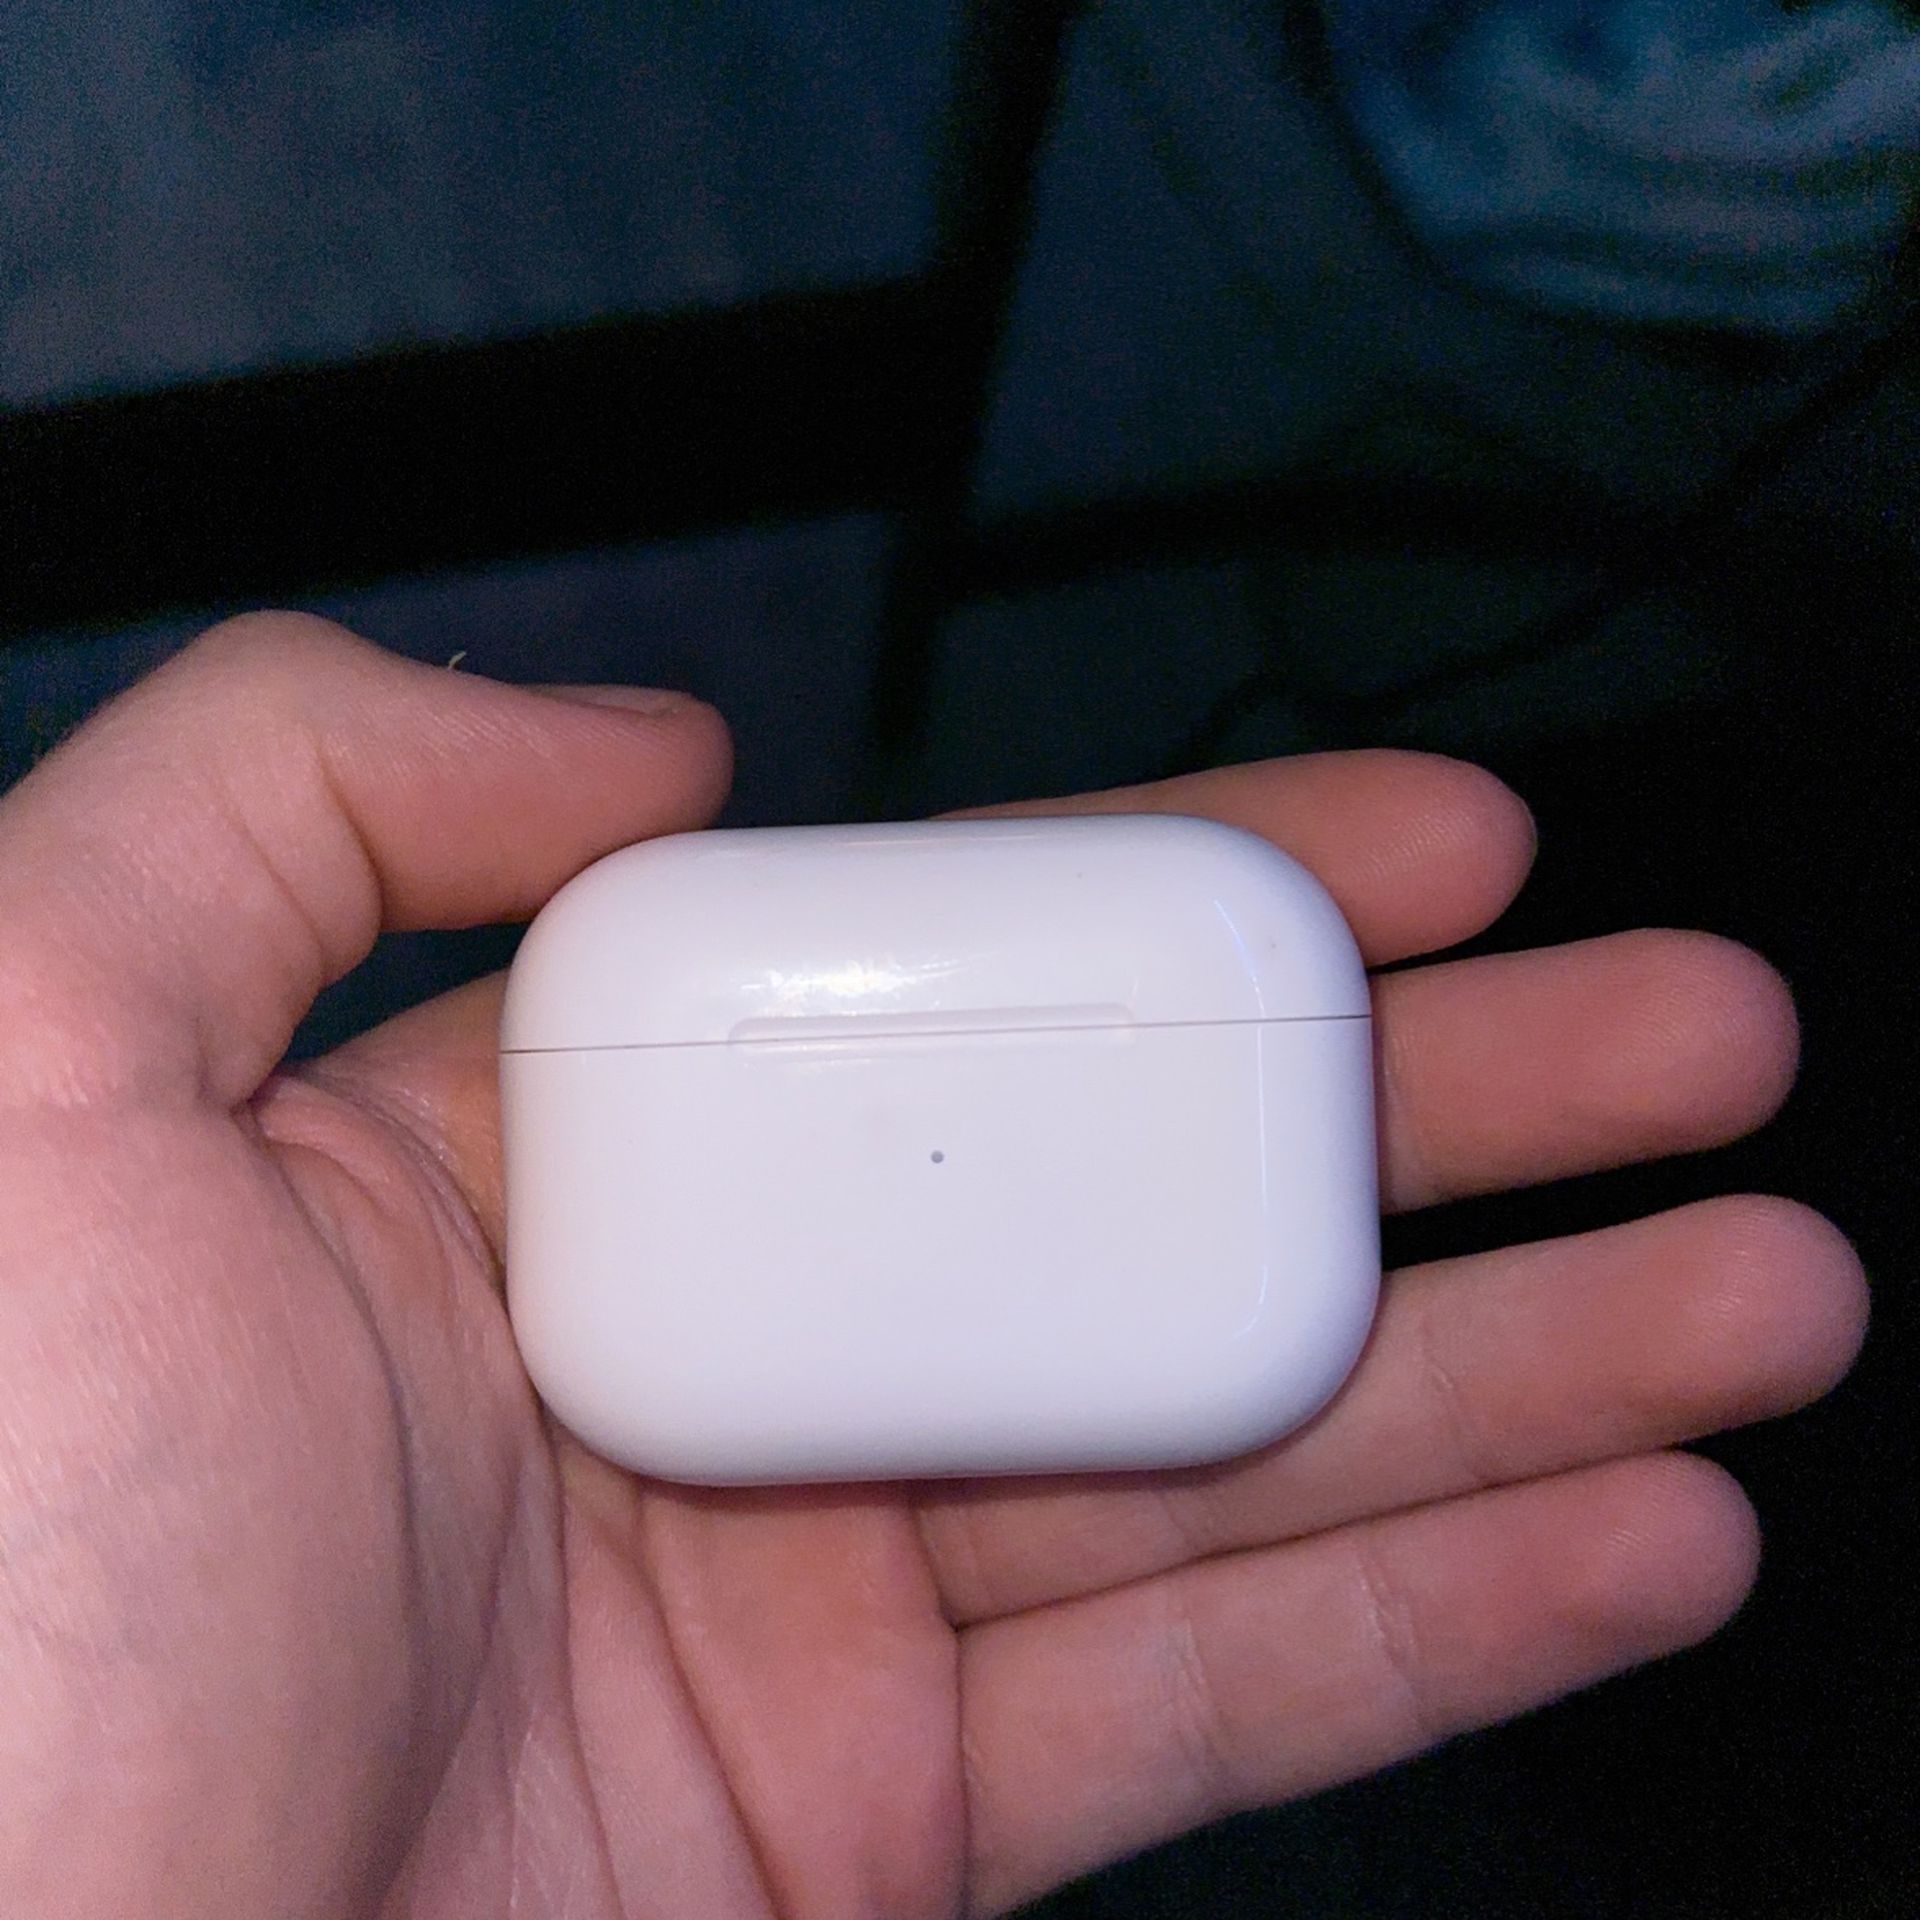 BEST OFFER-Airpod Pro (2nd Generation)